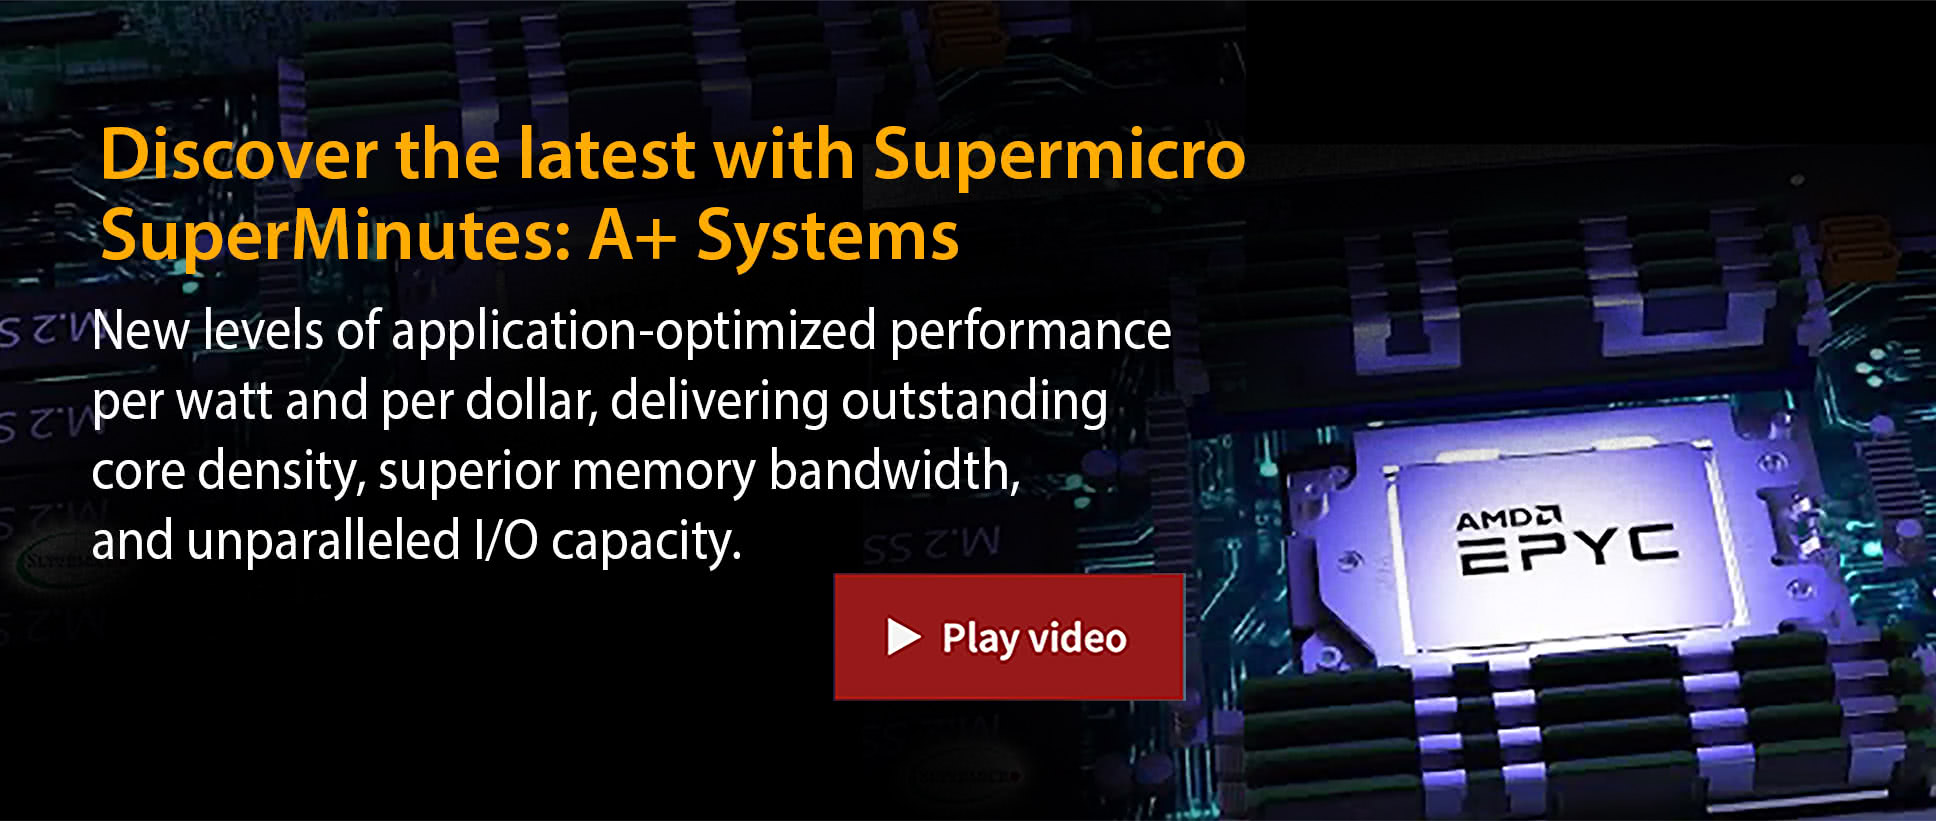 Discover the latest with Supermicro SuperMinutes: A+ Systems